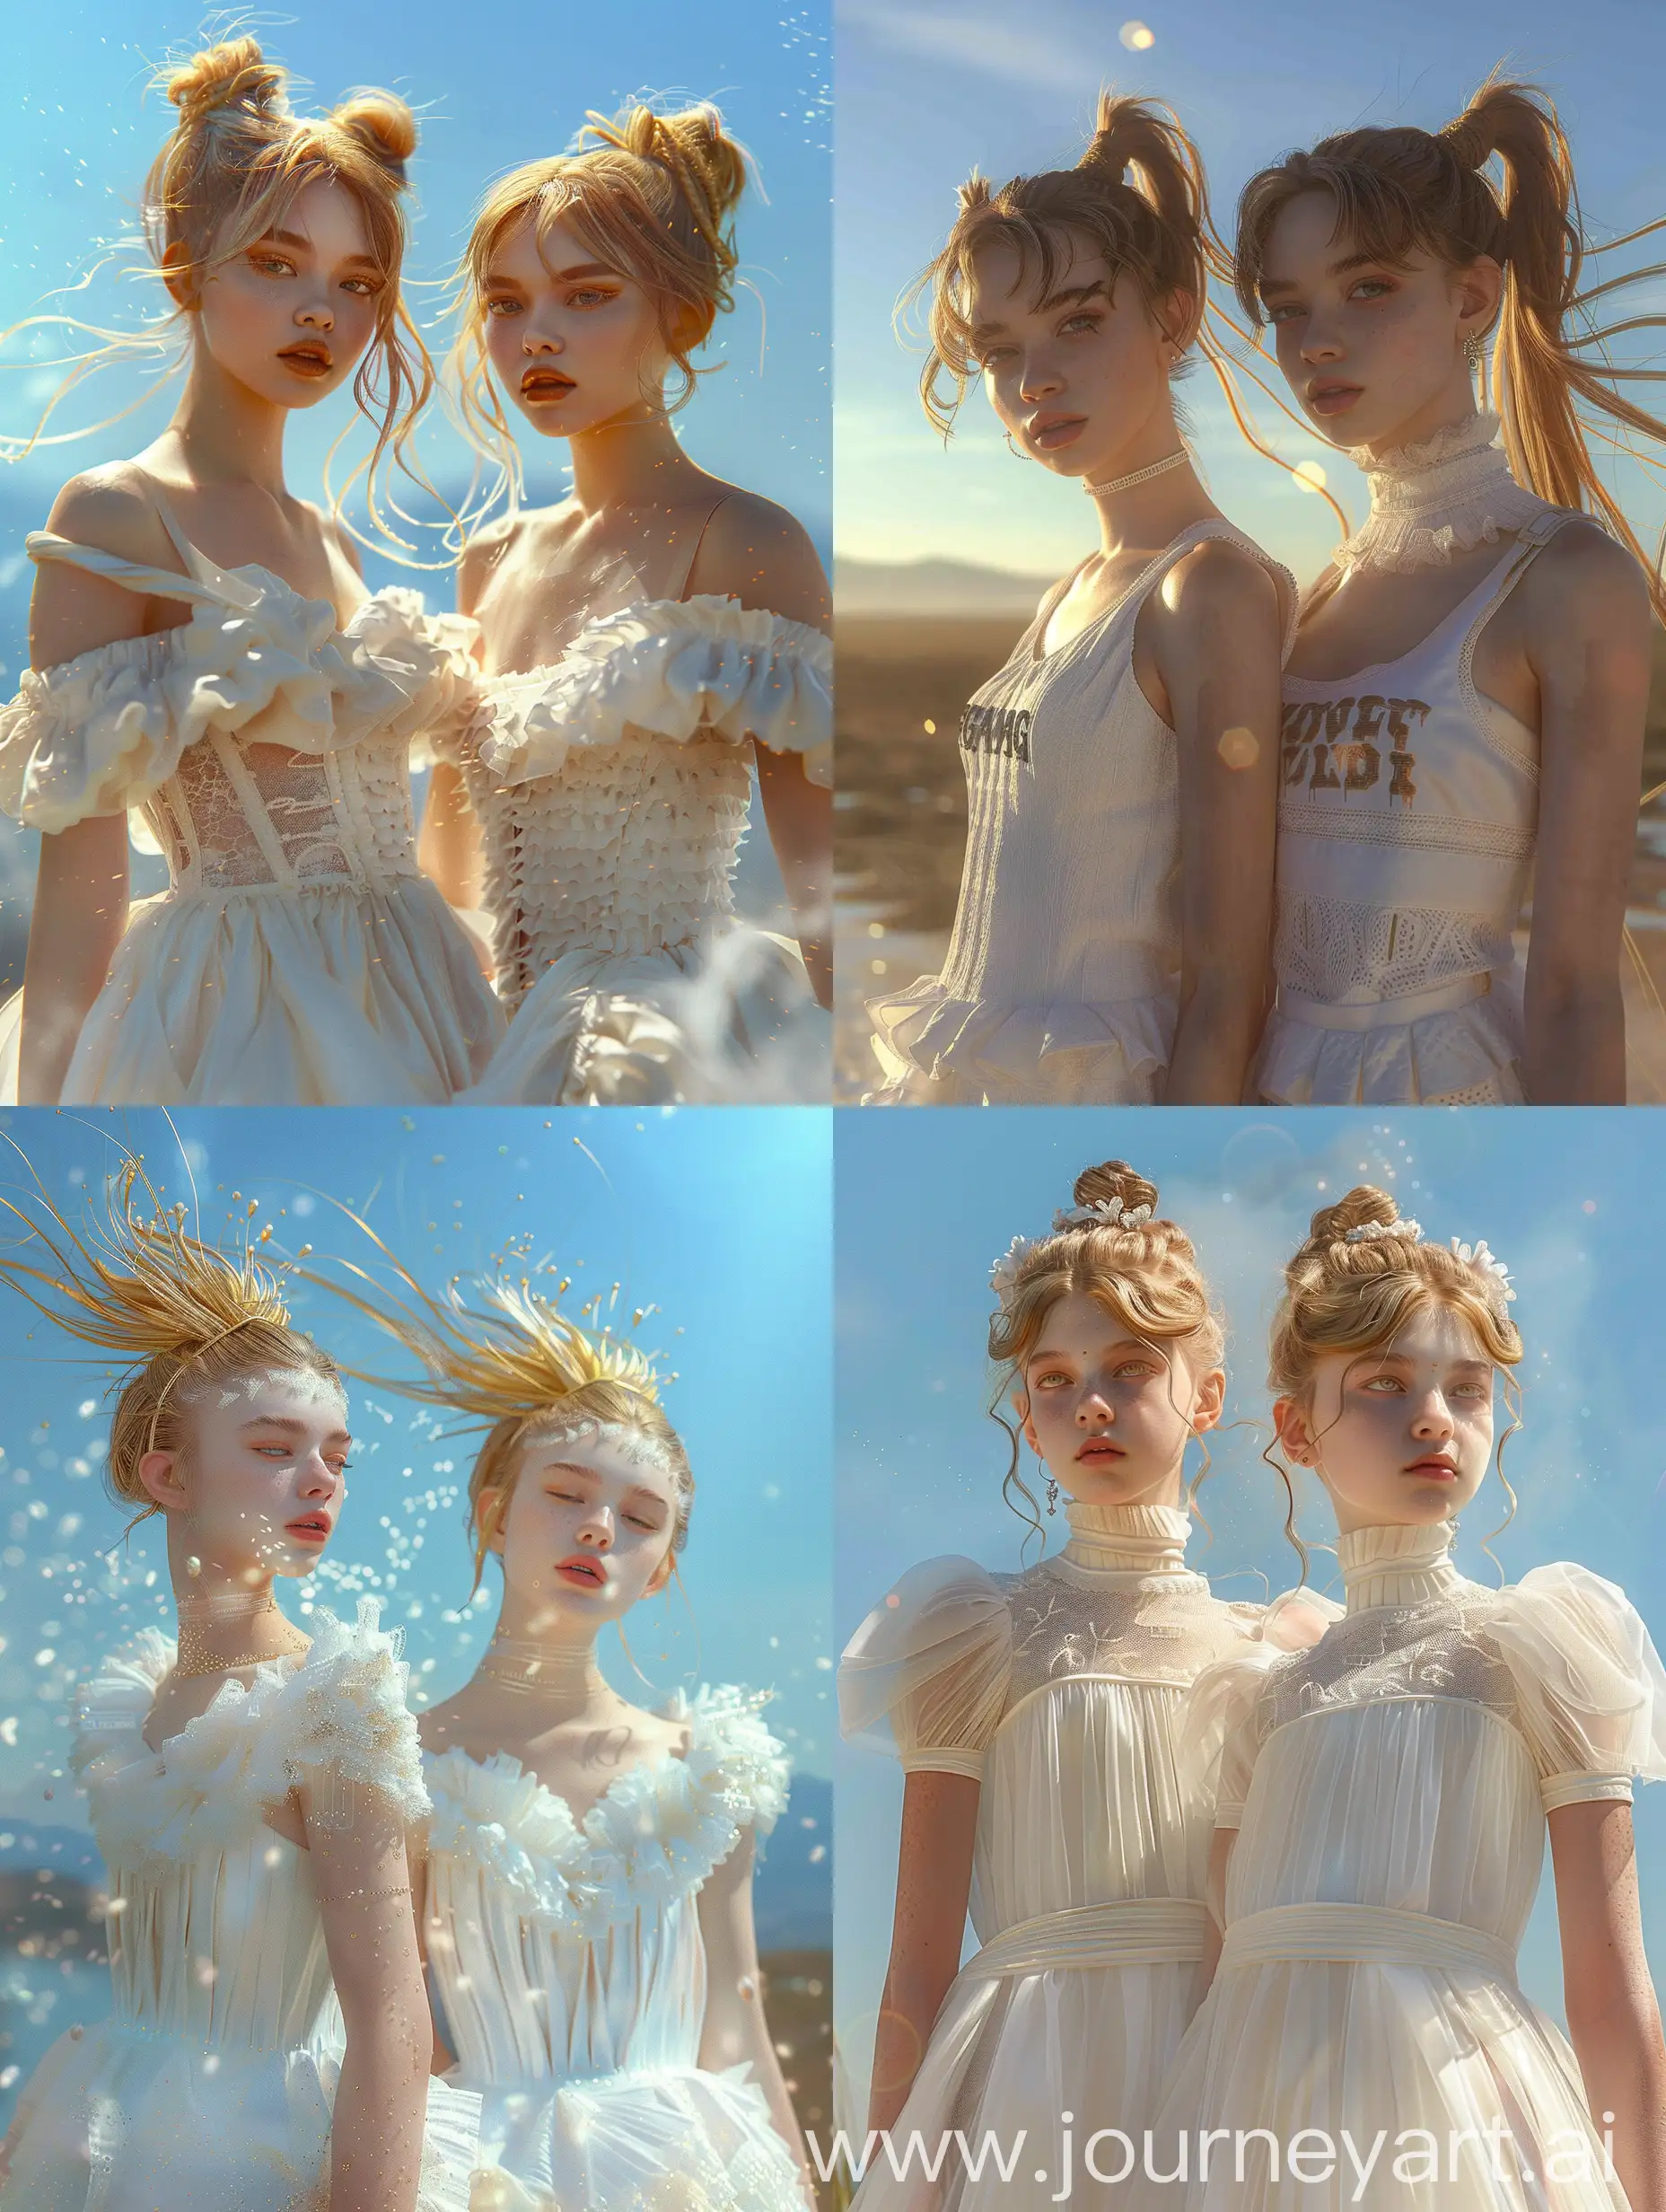 Ethereal-Twins-in-White-Balenciaga-Dresses-against-a-Serene-Landscape-under-a-Blue-Sky